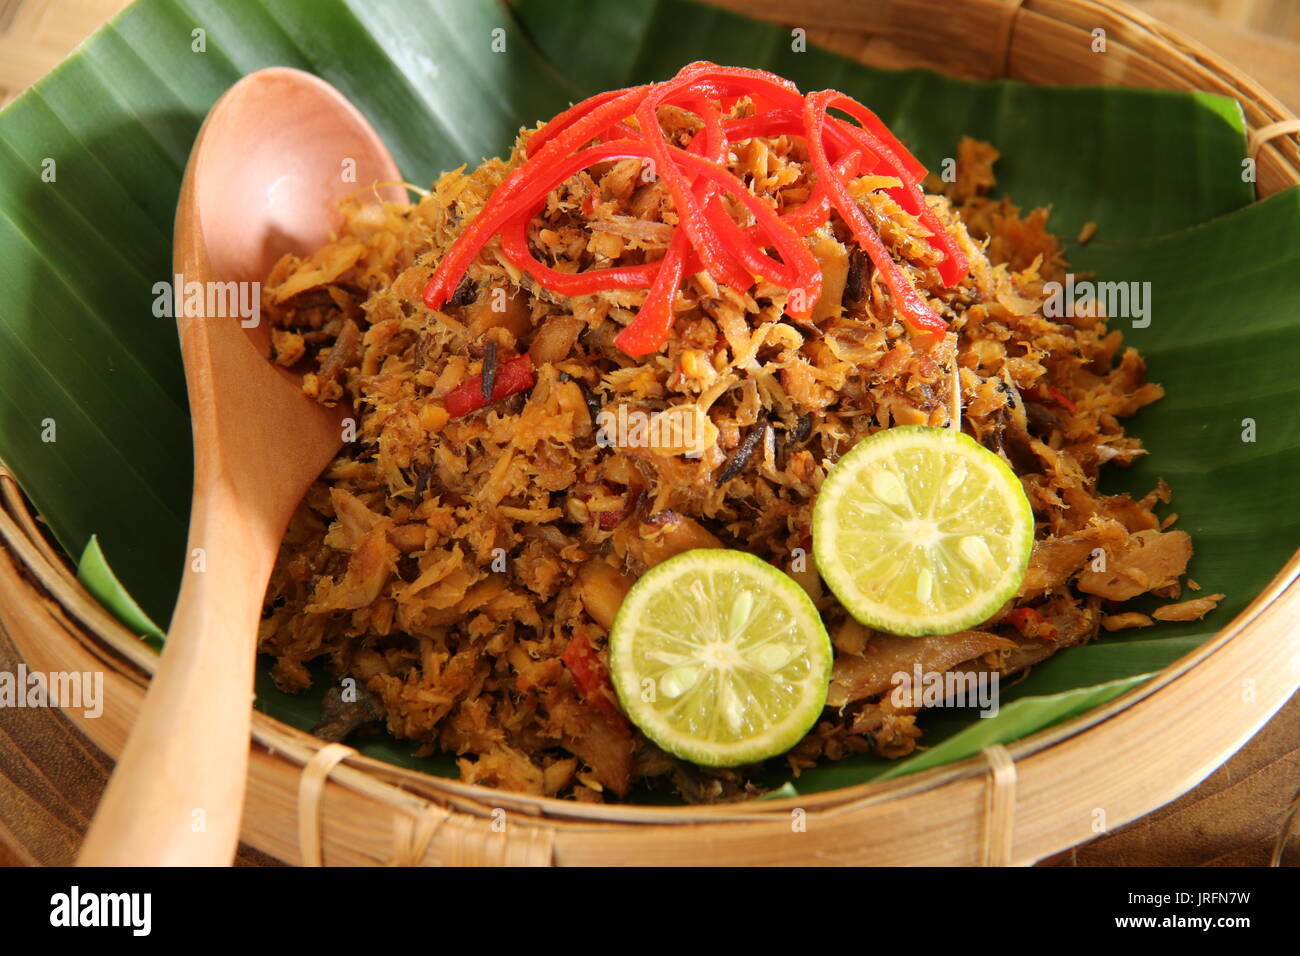 Pampis Ikan. Manadonese shredded fish dish cooked with traditional local spices. Stock Photo